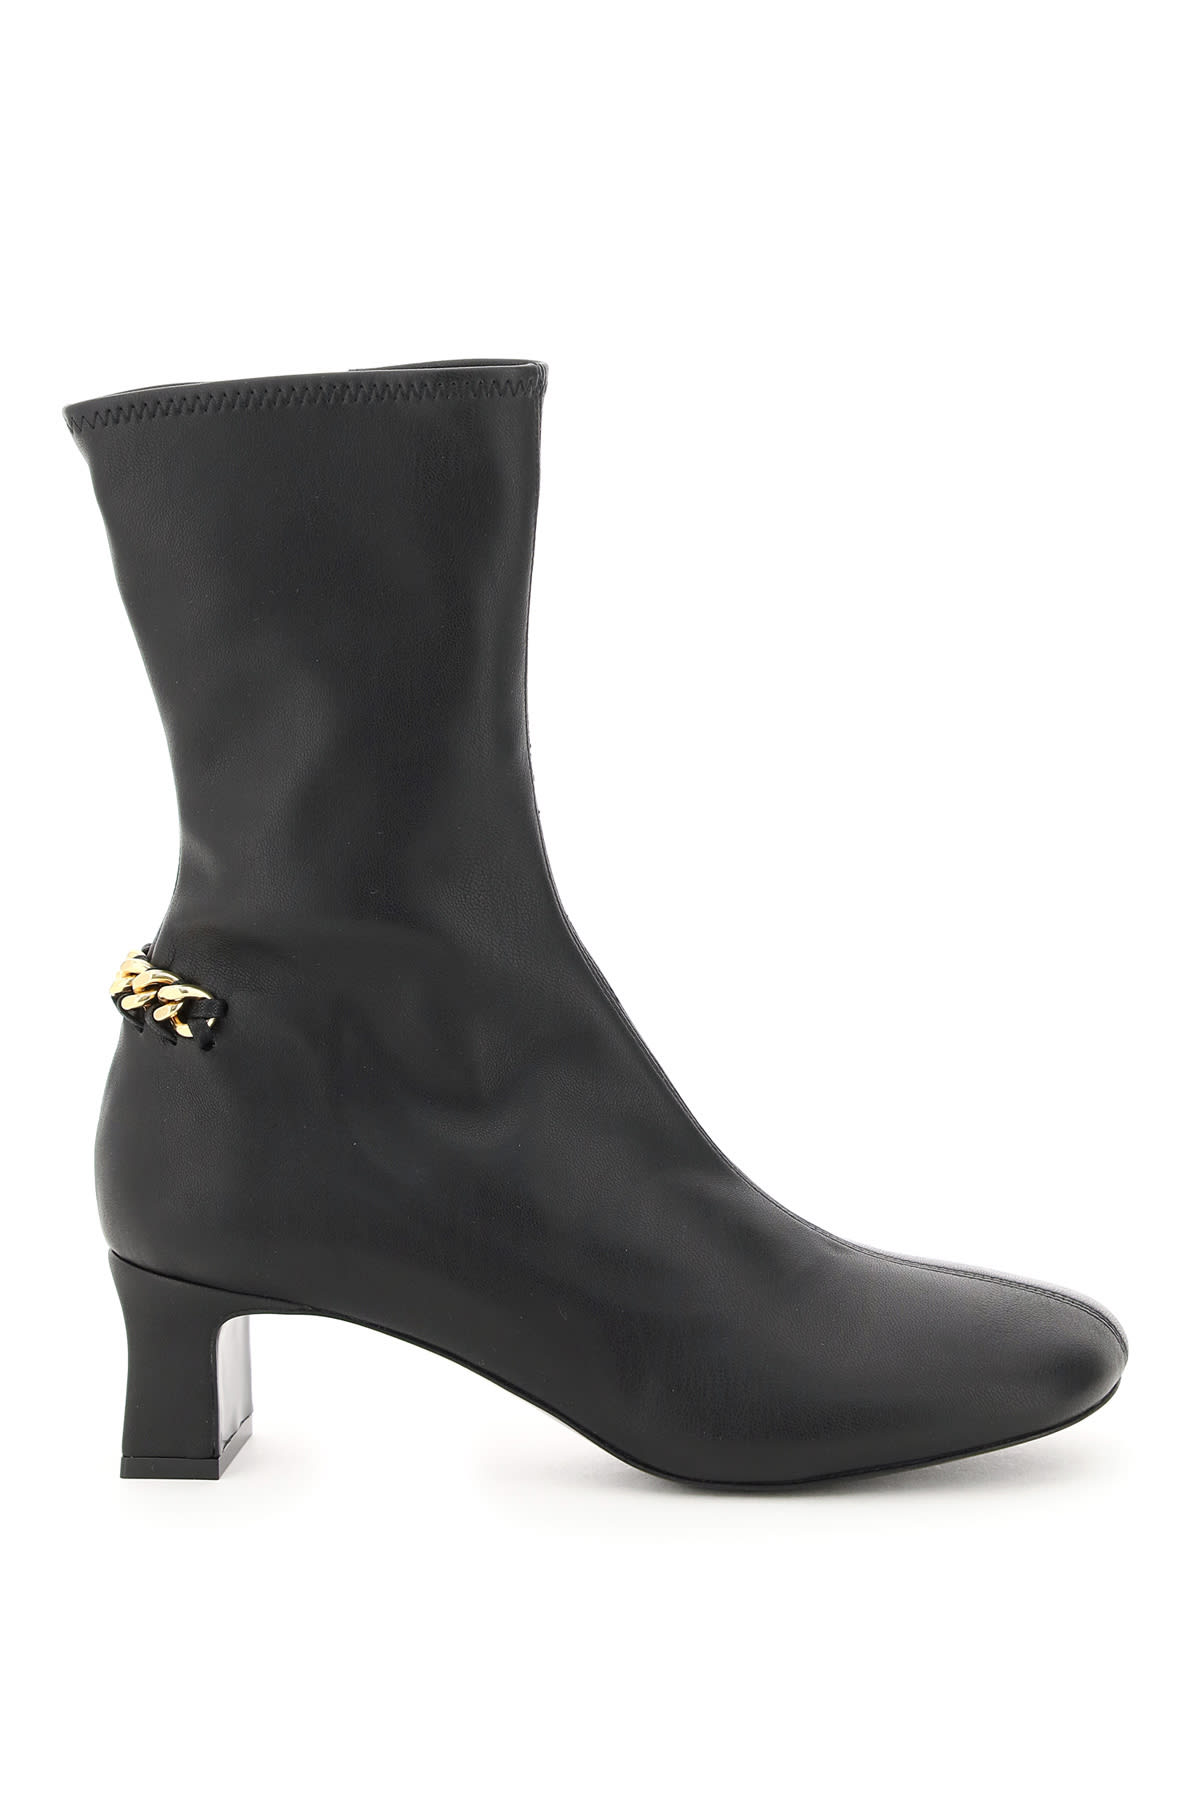 Buy Stella McCartney Stretch Ankle Boots With Chain online, shop Stella McCartney shoes with free shipping